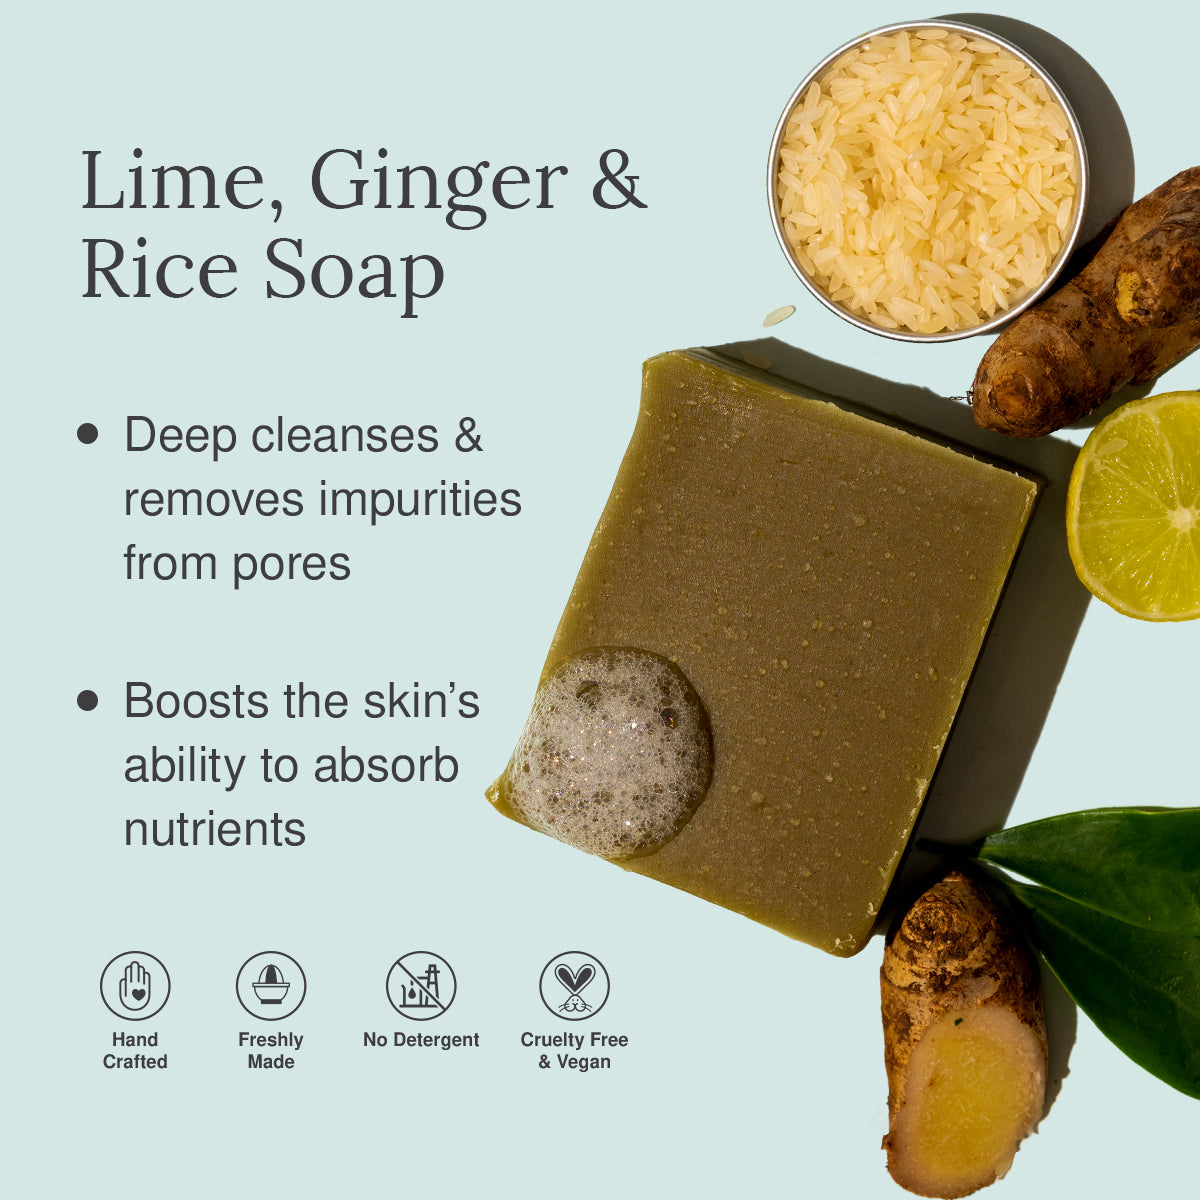 Lime, Ginger and Rice Soap